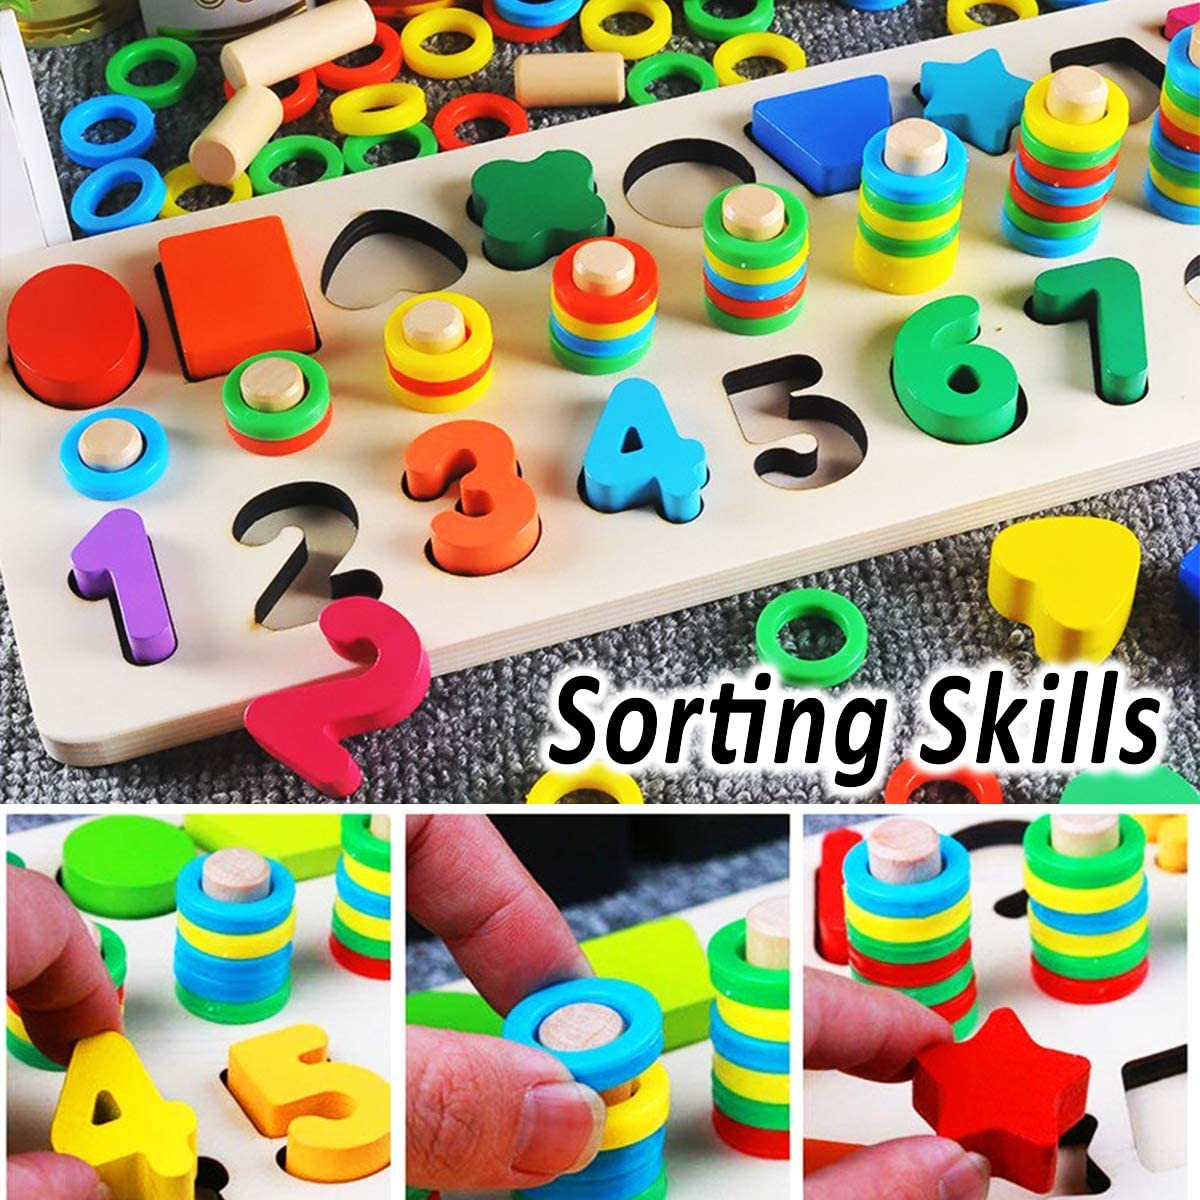 Toddlers - Shape Sorter Counting Game for Wooden Number Puzzle Sorting Montessori Toys for Age 3 4 5 Year olds Kids - Preschool Education Math Stacking Block Learning Wood Chunky Jigsaw - image 5 of 6